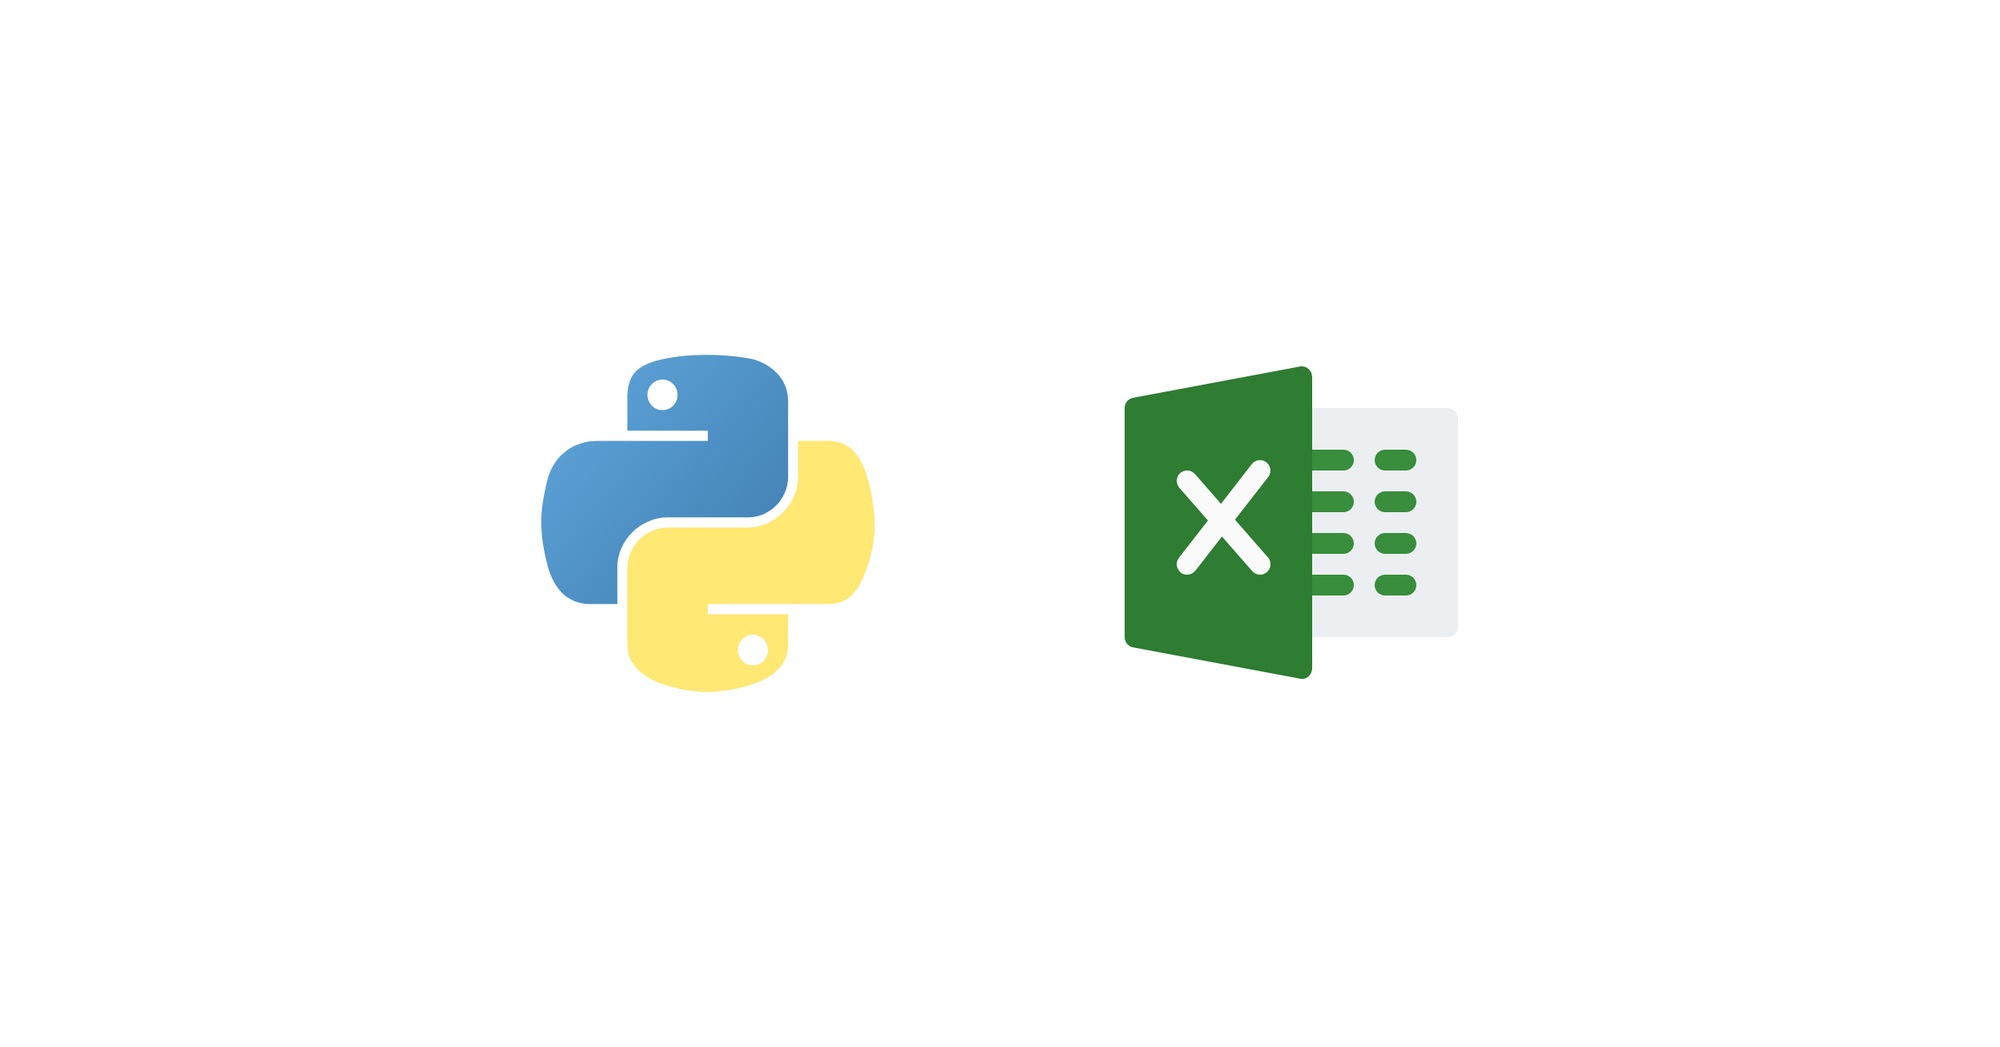 Dealing with Excel Spreadsheets using Python